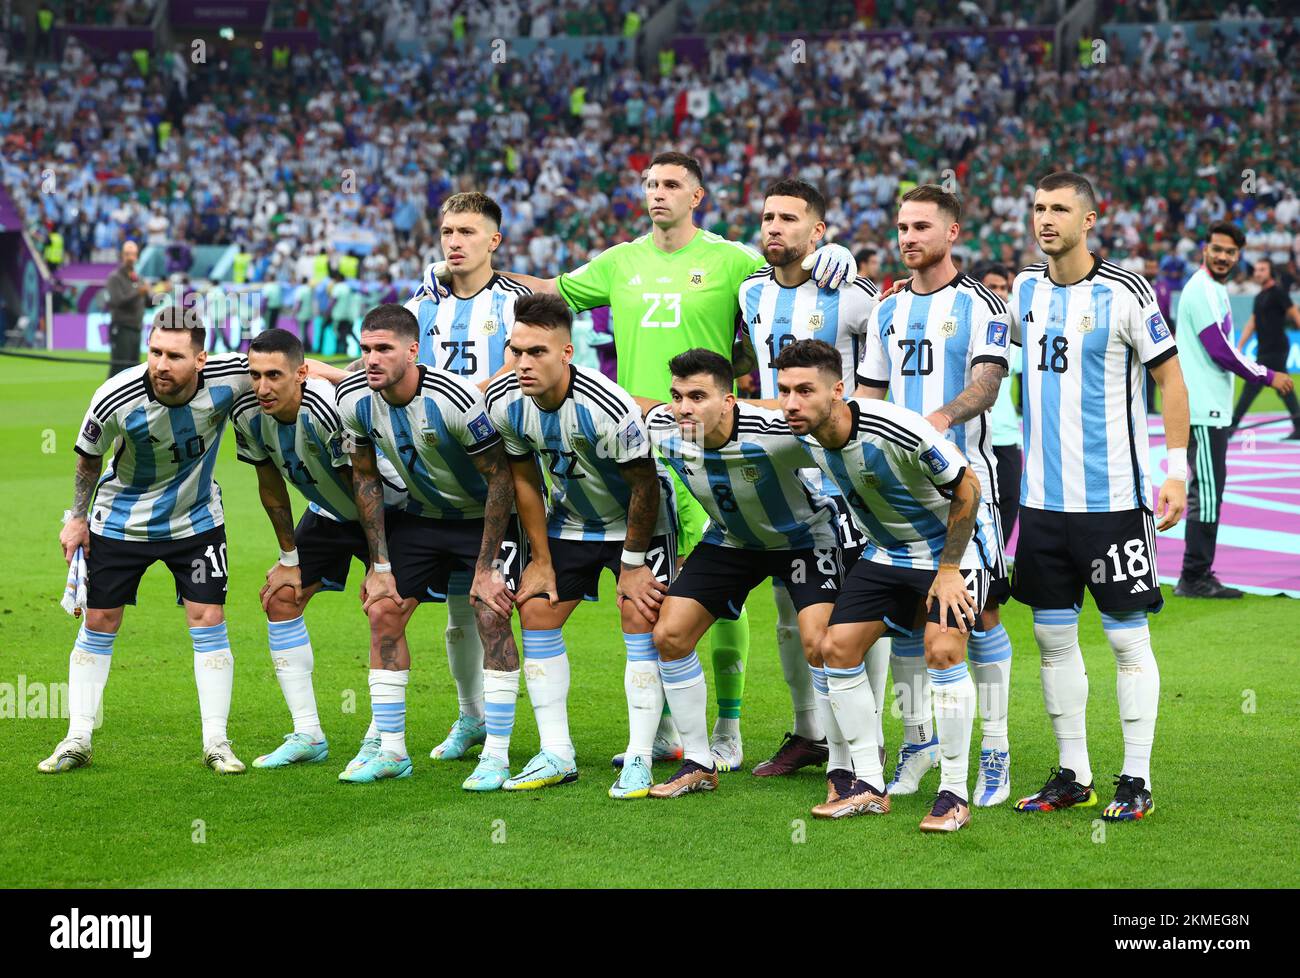 Lusail, Qatar. 26th Nov, 2022. Soccer, World Cup, Argentina - Mexico, Preliminary Round, Group C, Matchday 2, Lusail Iconic Stadium, the starting eleven of Argentina stands together for a team photo before kickoff, Lionel Messi (l-r), Ángel di Maria, Rodrigo De Paul, Lisandro Martínez, Lautaro Martínez, goalkeeper Emiliano Martinez, Marcos Acuna, Nicolás Otamendi, Gonzalo Montiel, Alexis Mac Allister and Guido Rodriguez. Credit: Tom Weller/dpa/Alamy Live News Stock Photo